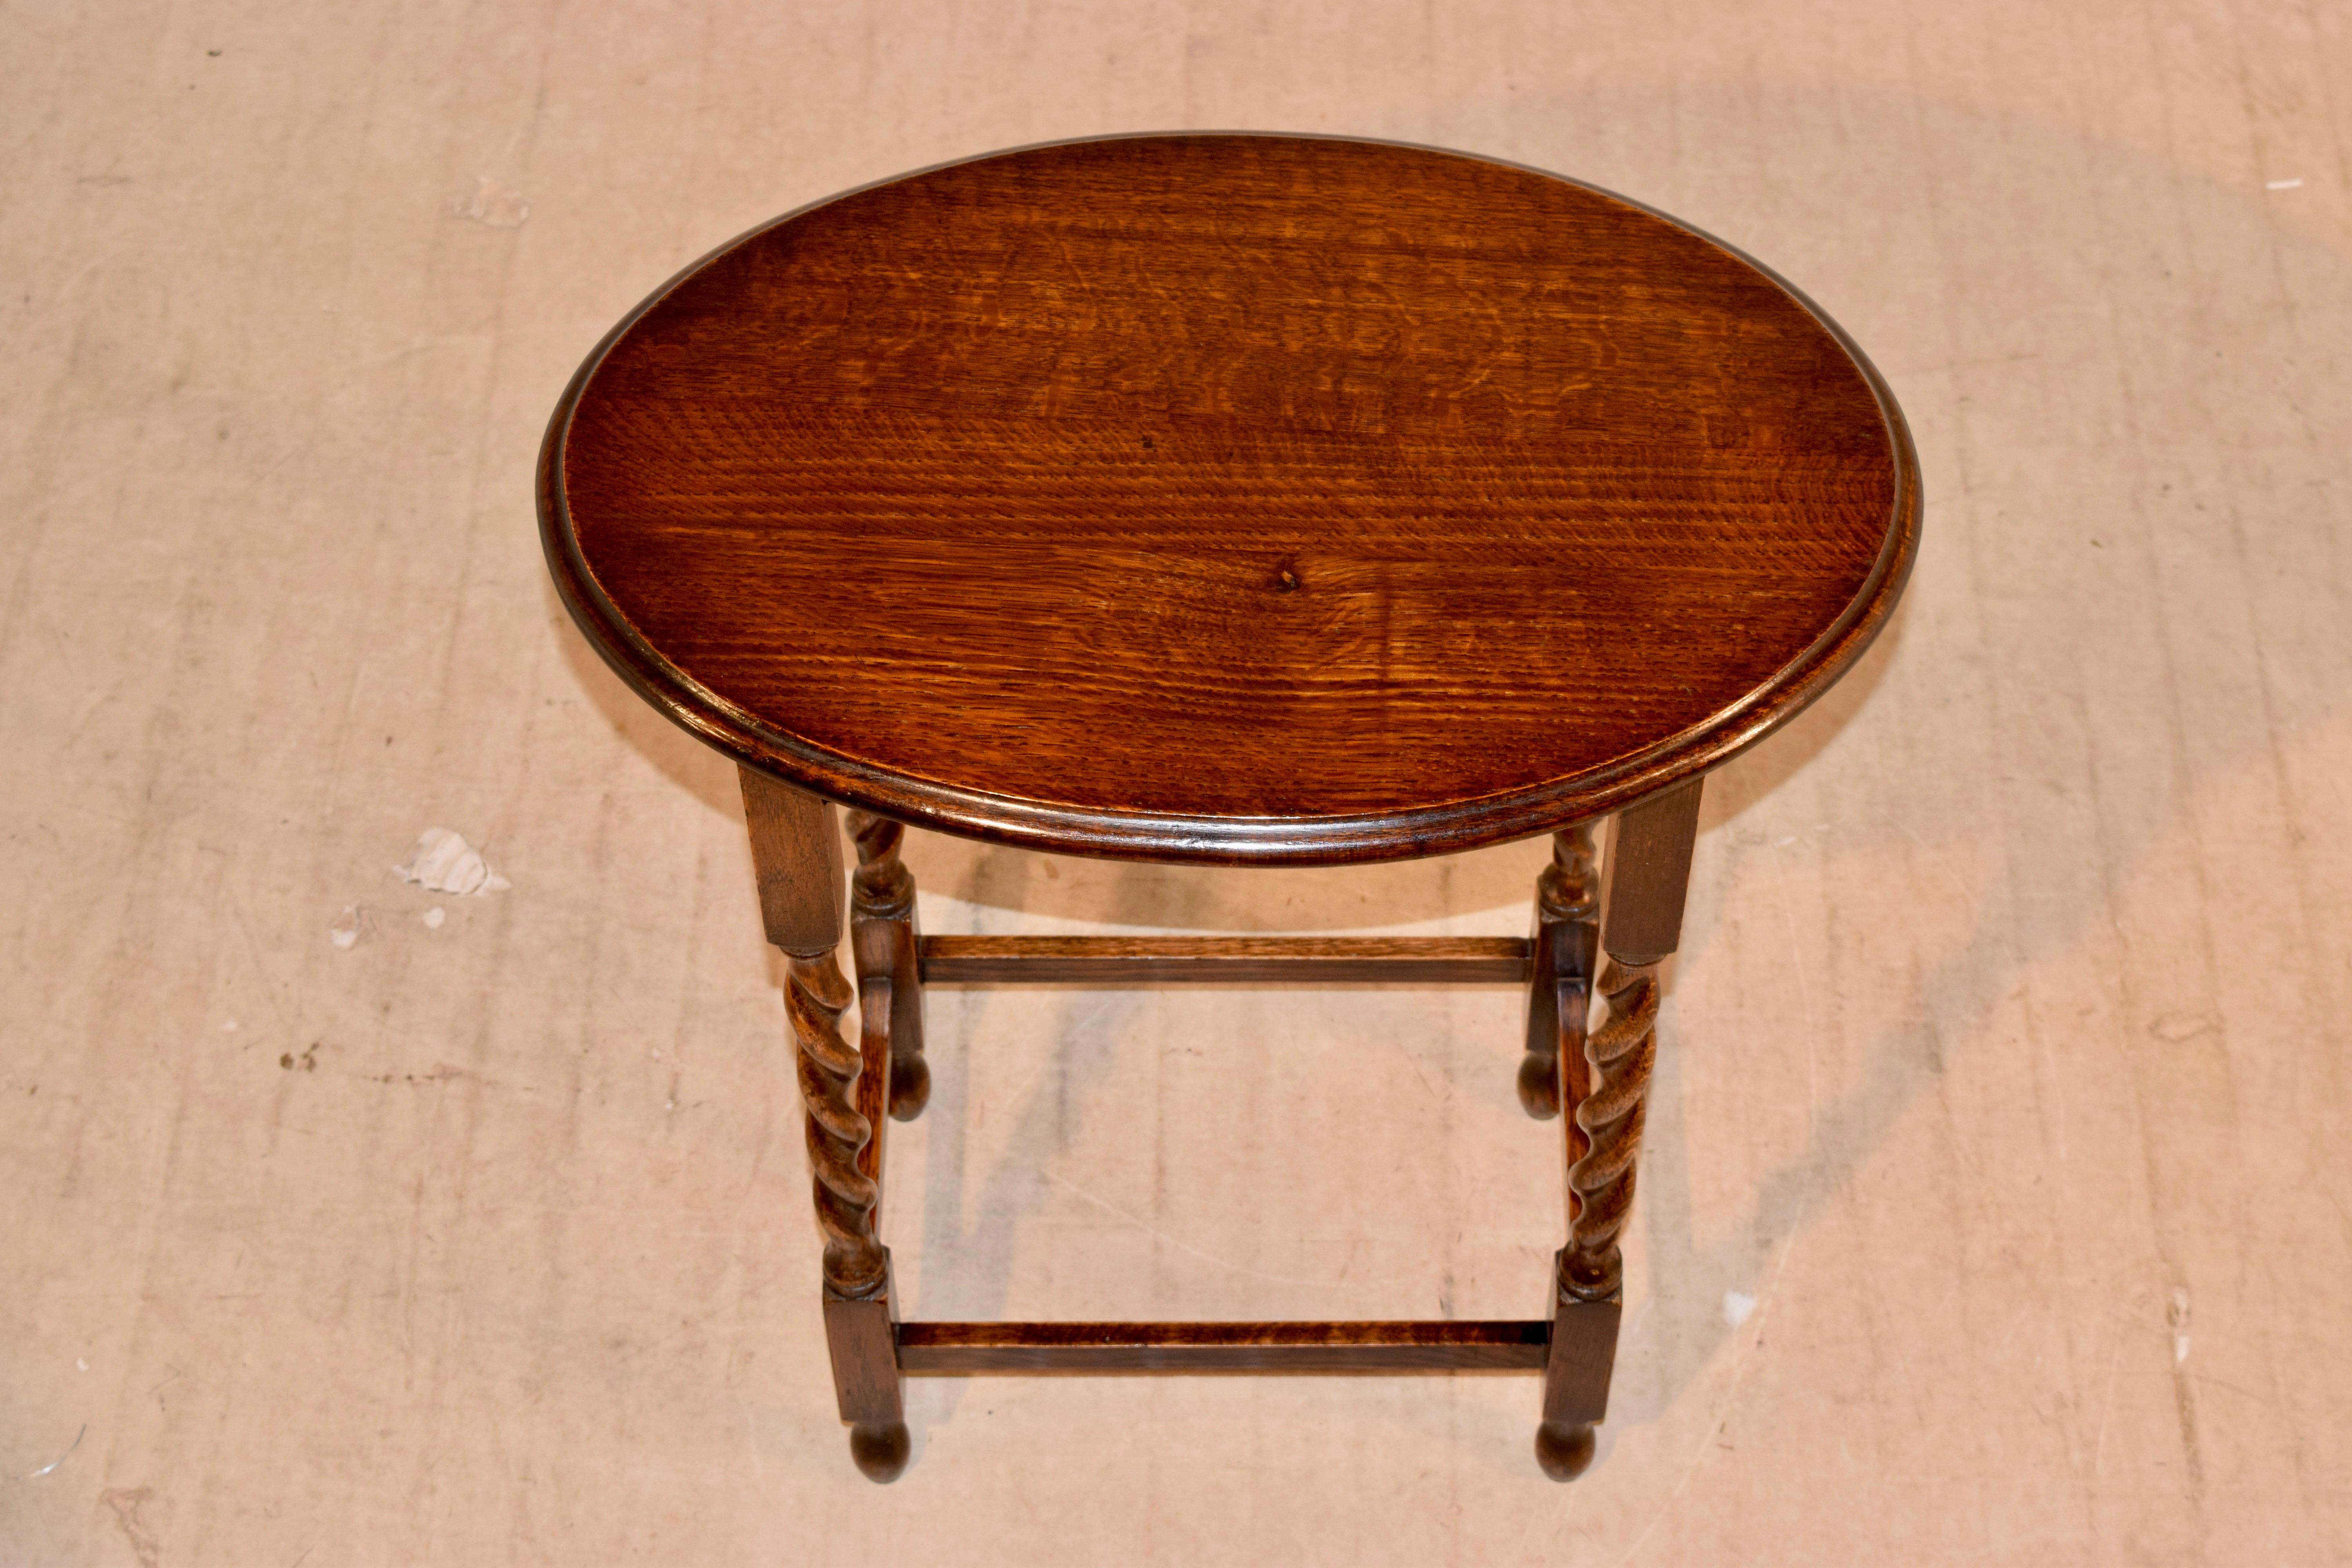 Early 20th Century English Oval Occasional Table, circa 1900